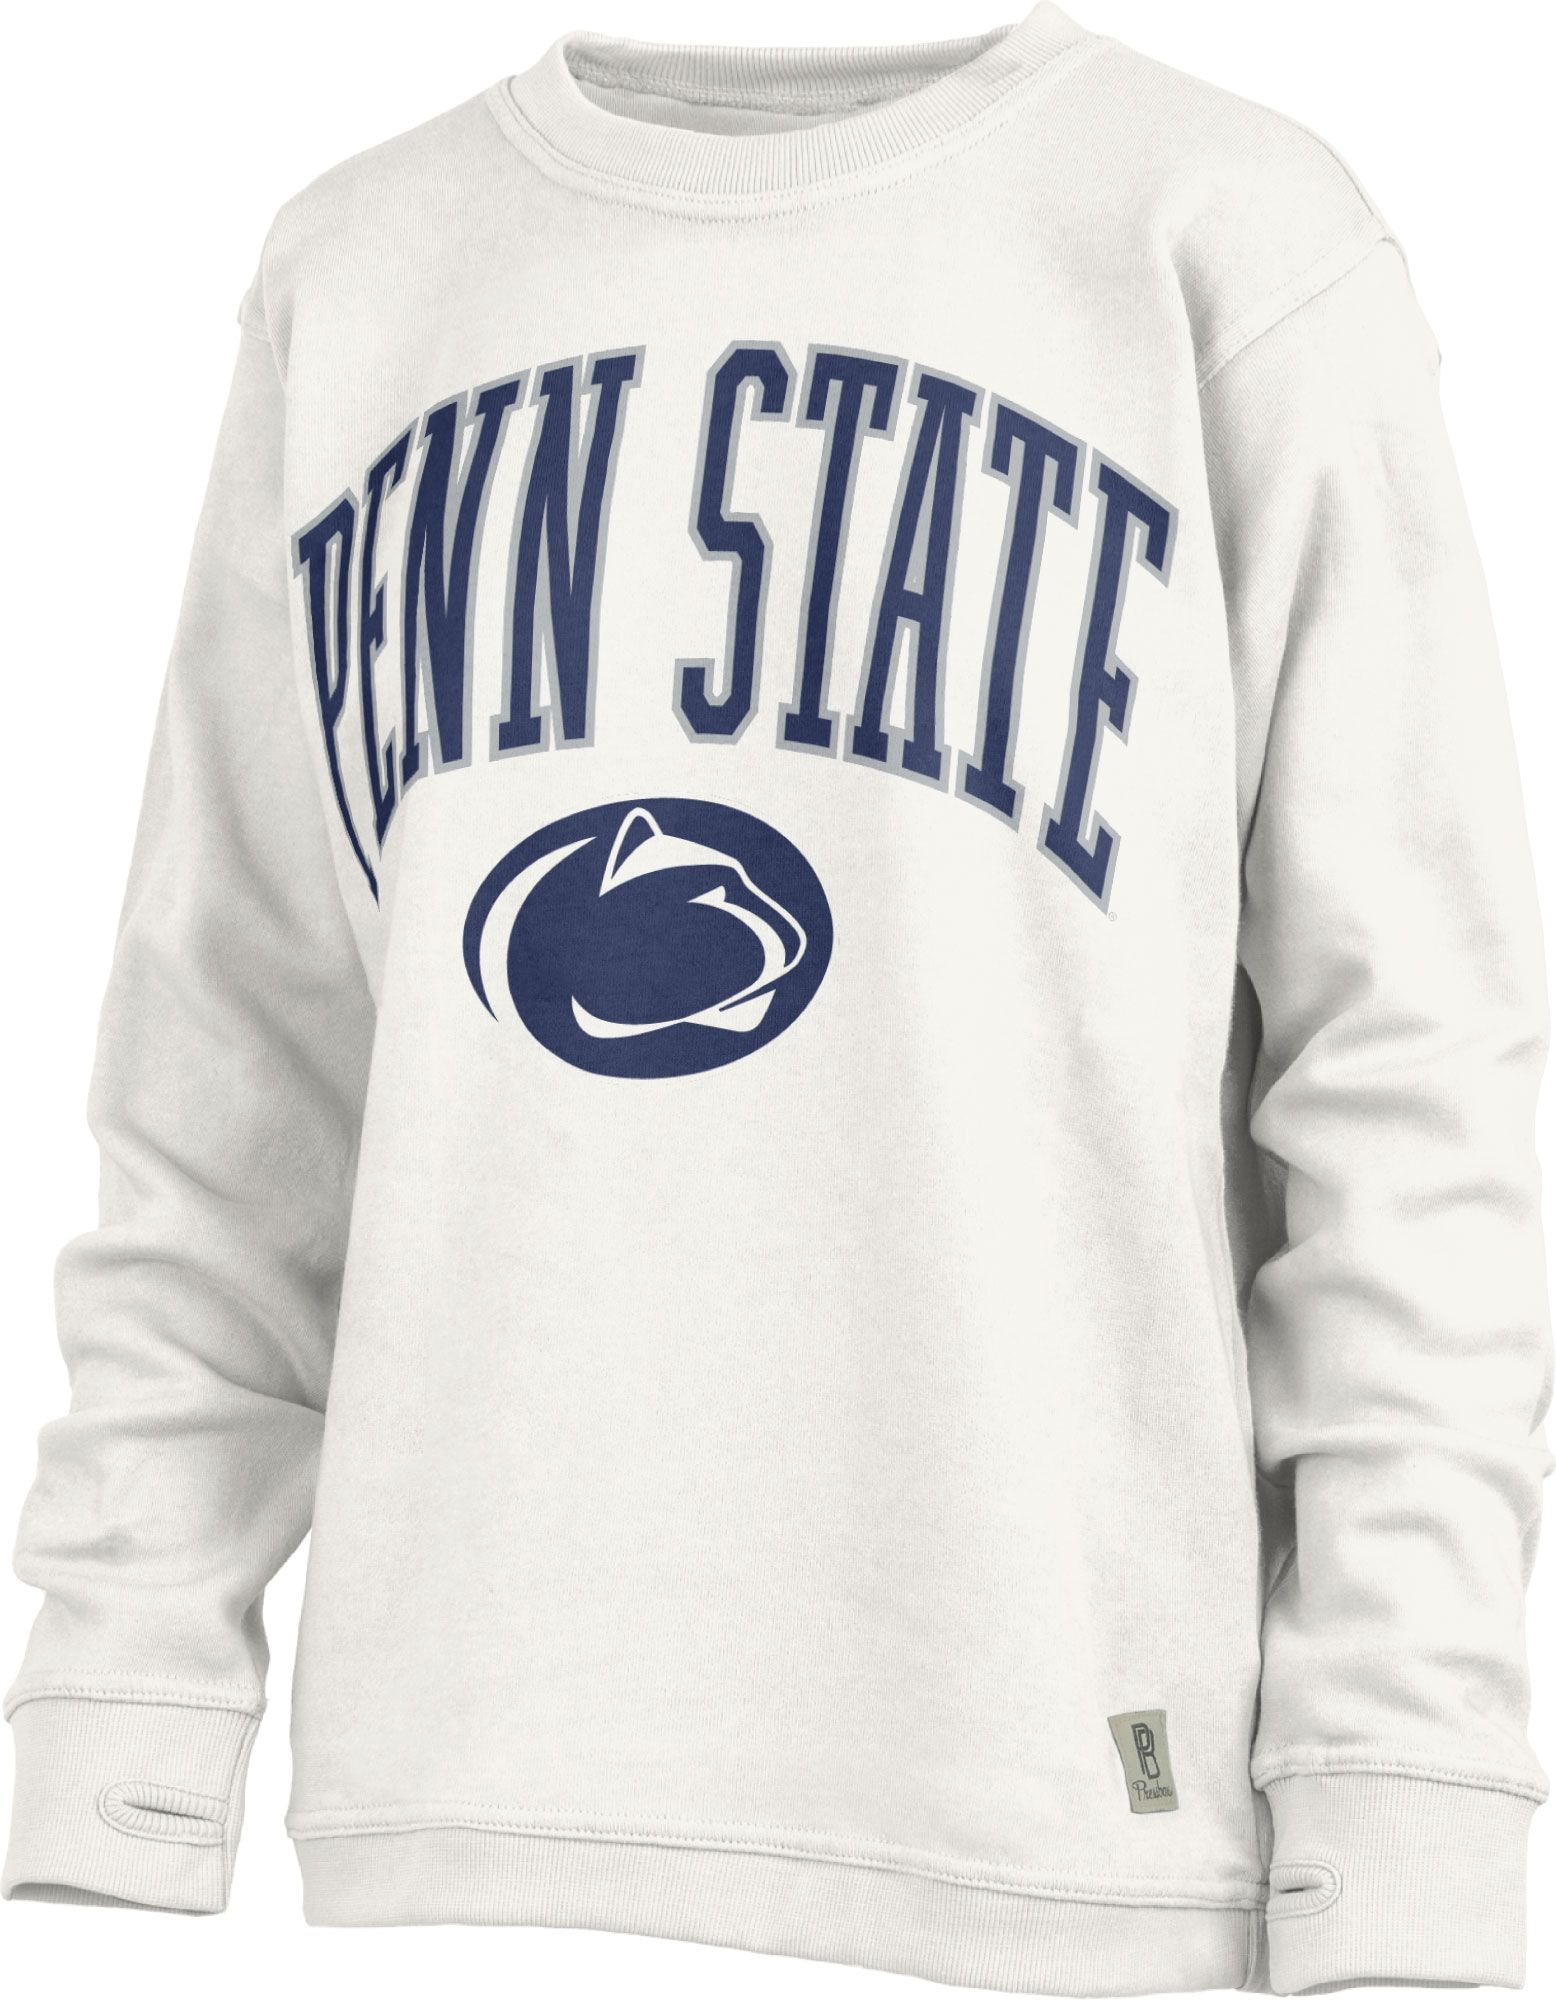 Nittany Outlet Penn State Youth Baseball T-Shirt Grey